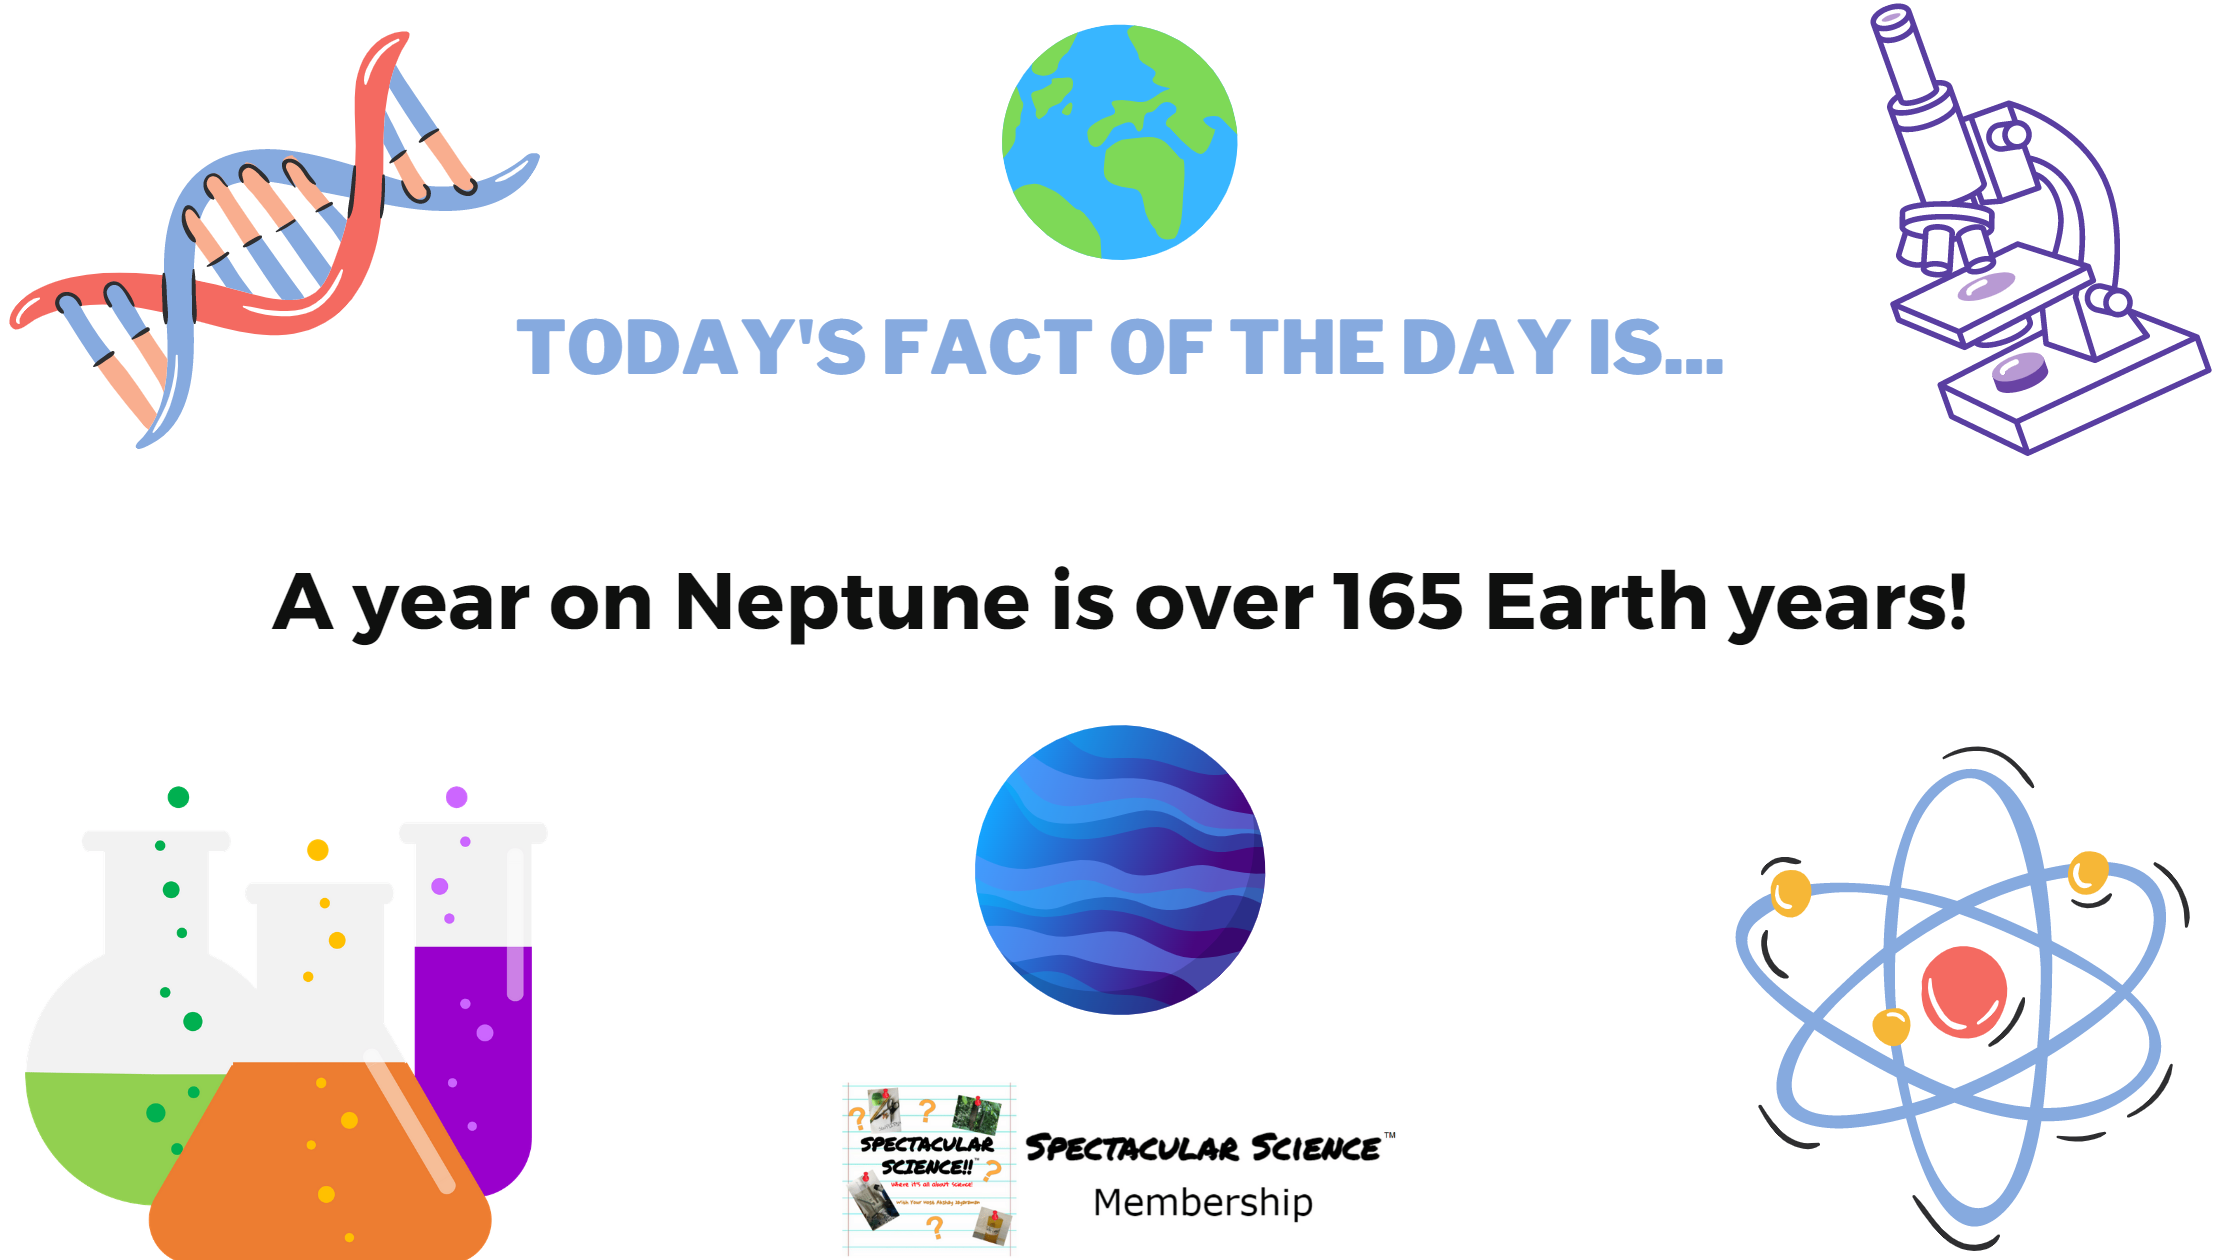 Fact of the Day Image December 31st